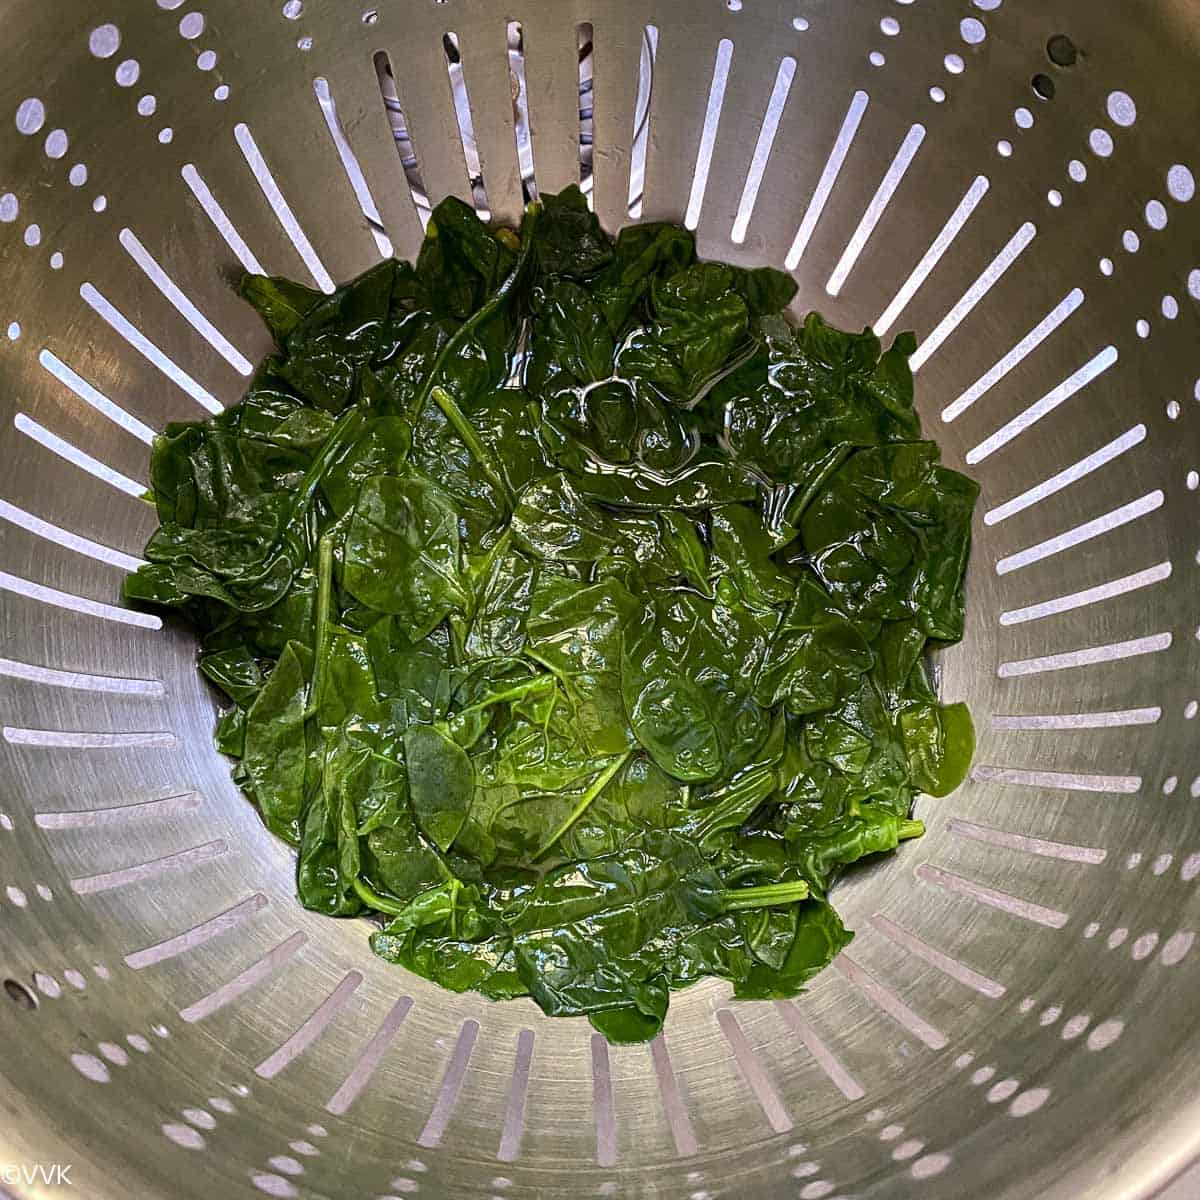 rinsing the blanched spinach with cold water